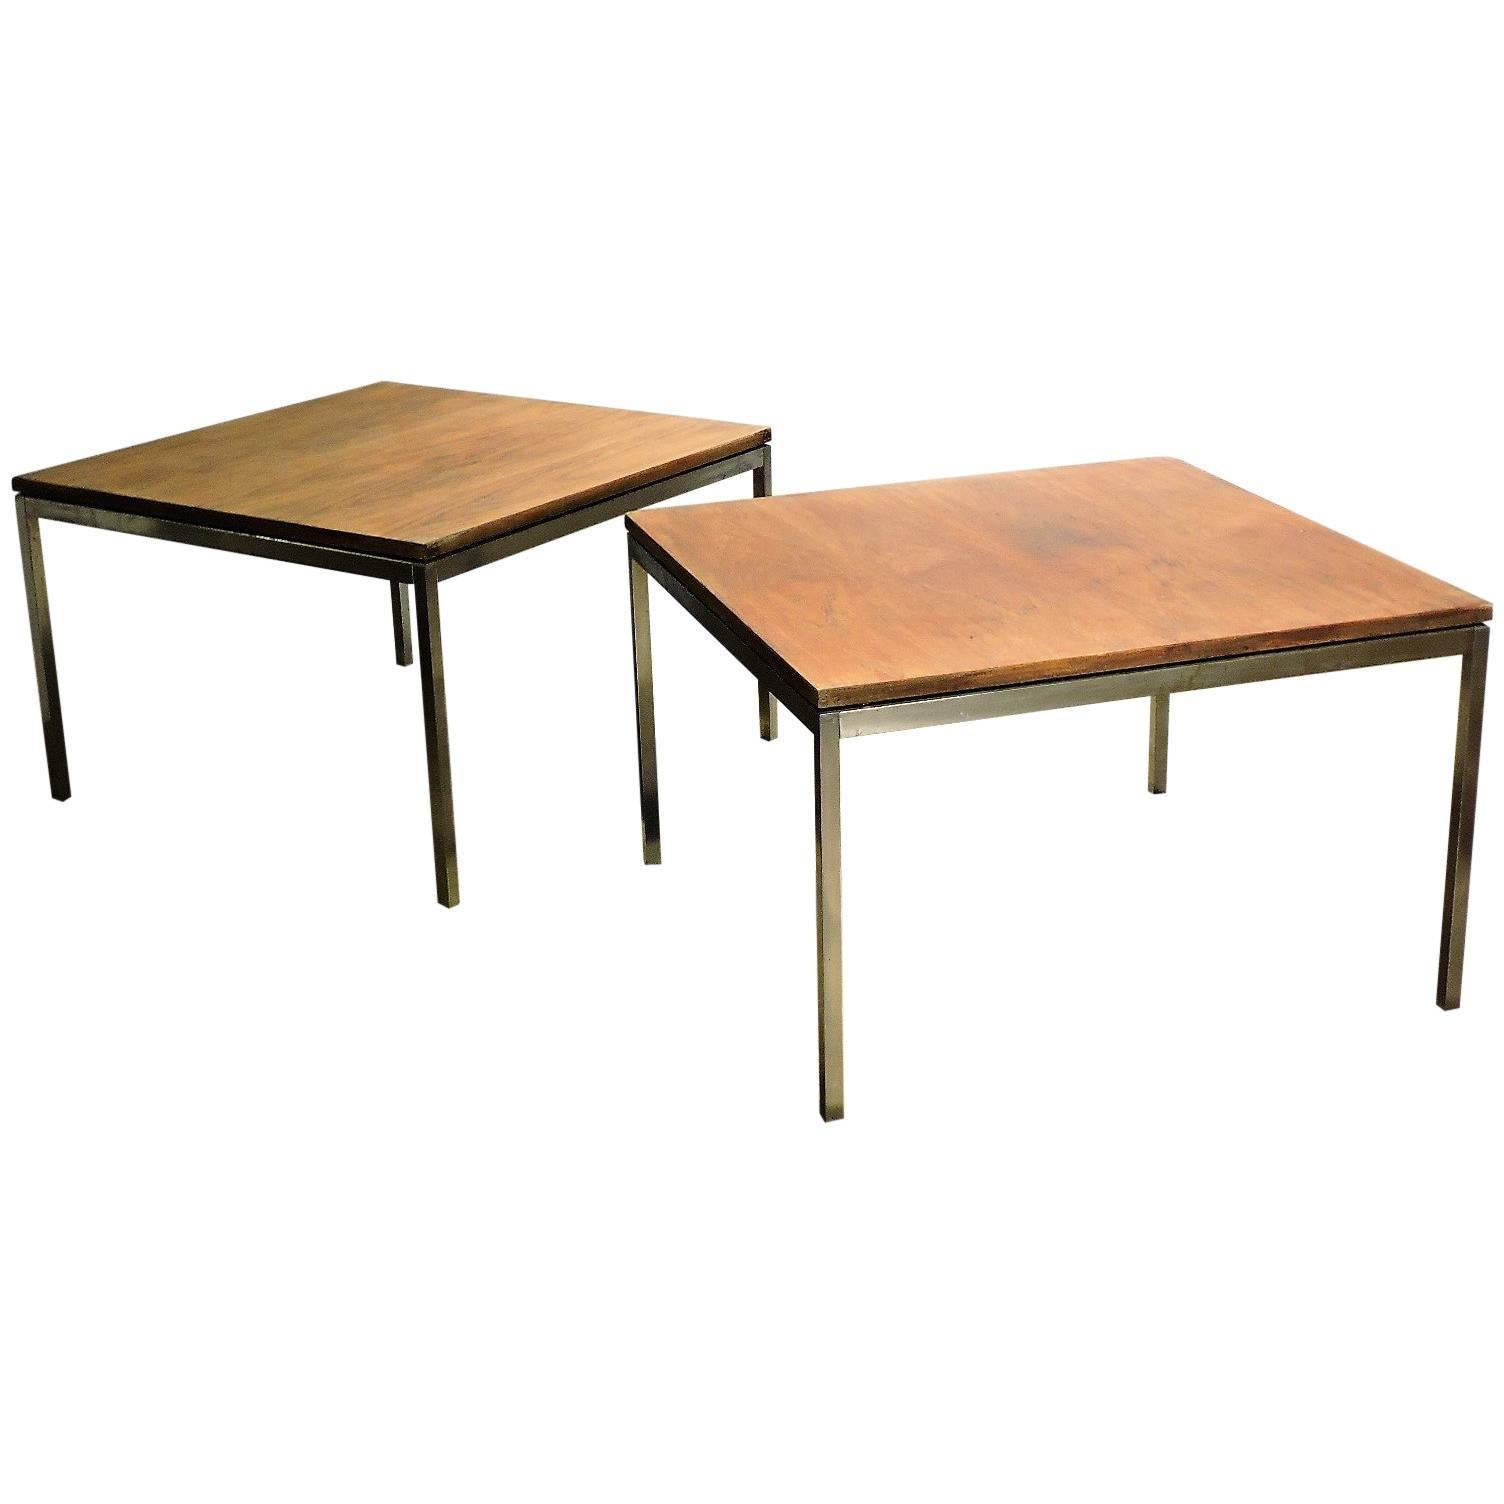 Early Florence Knoll Steel Tables with Floating Walnut Tops